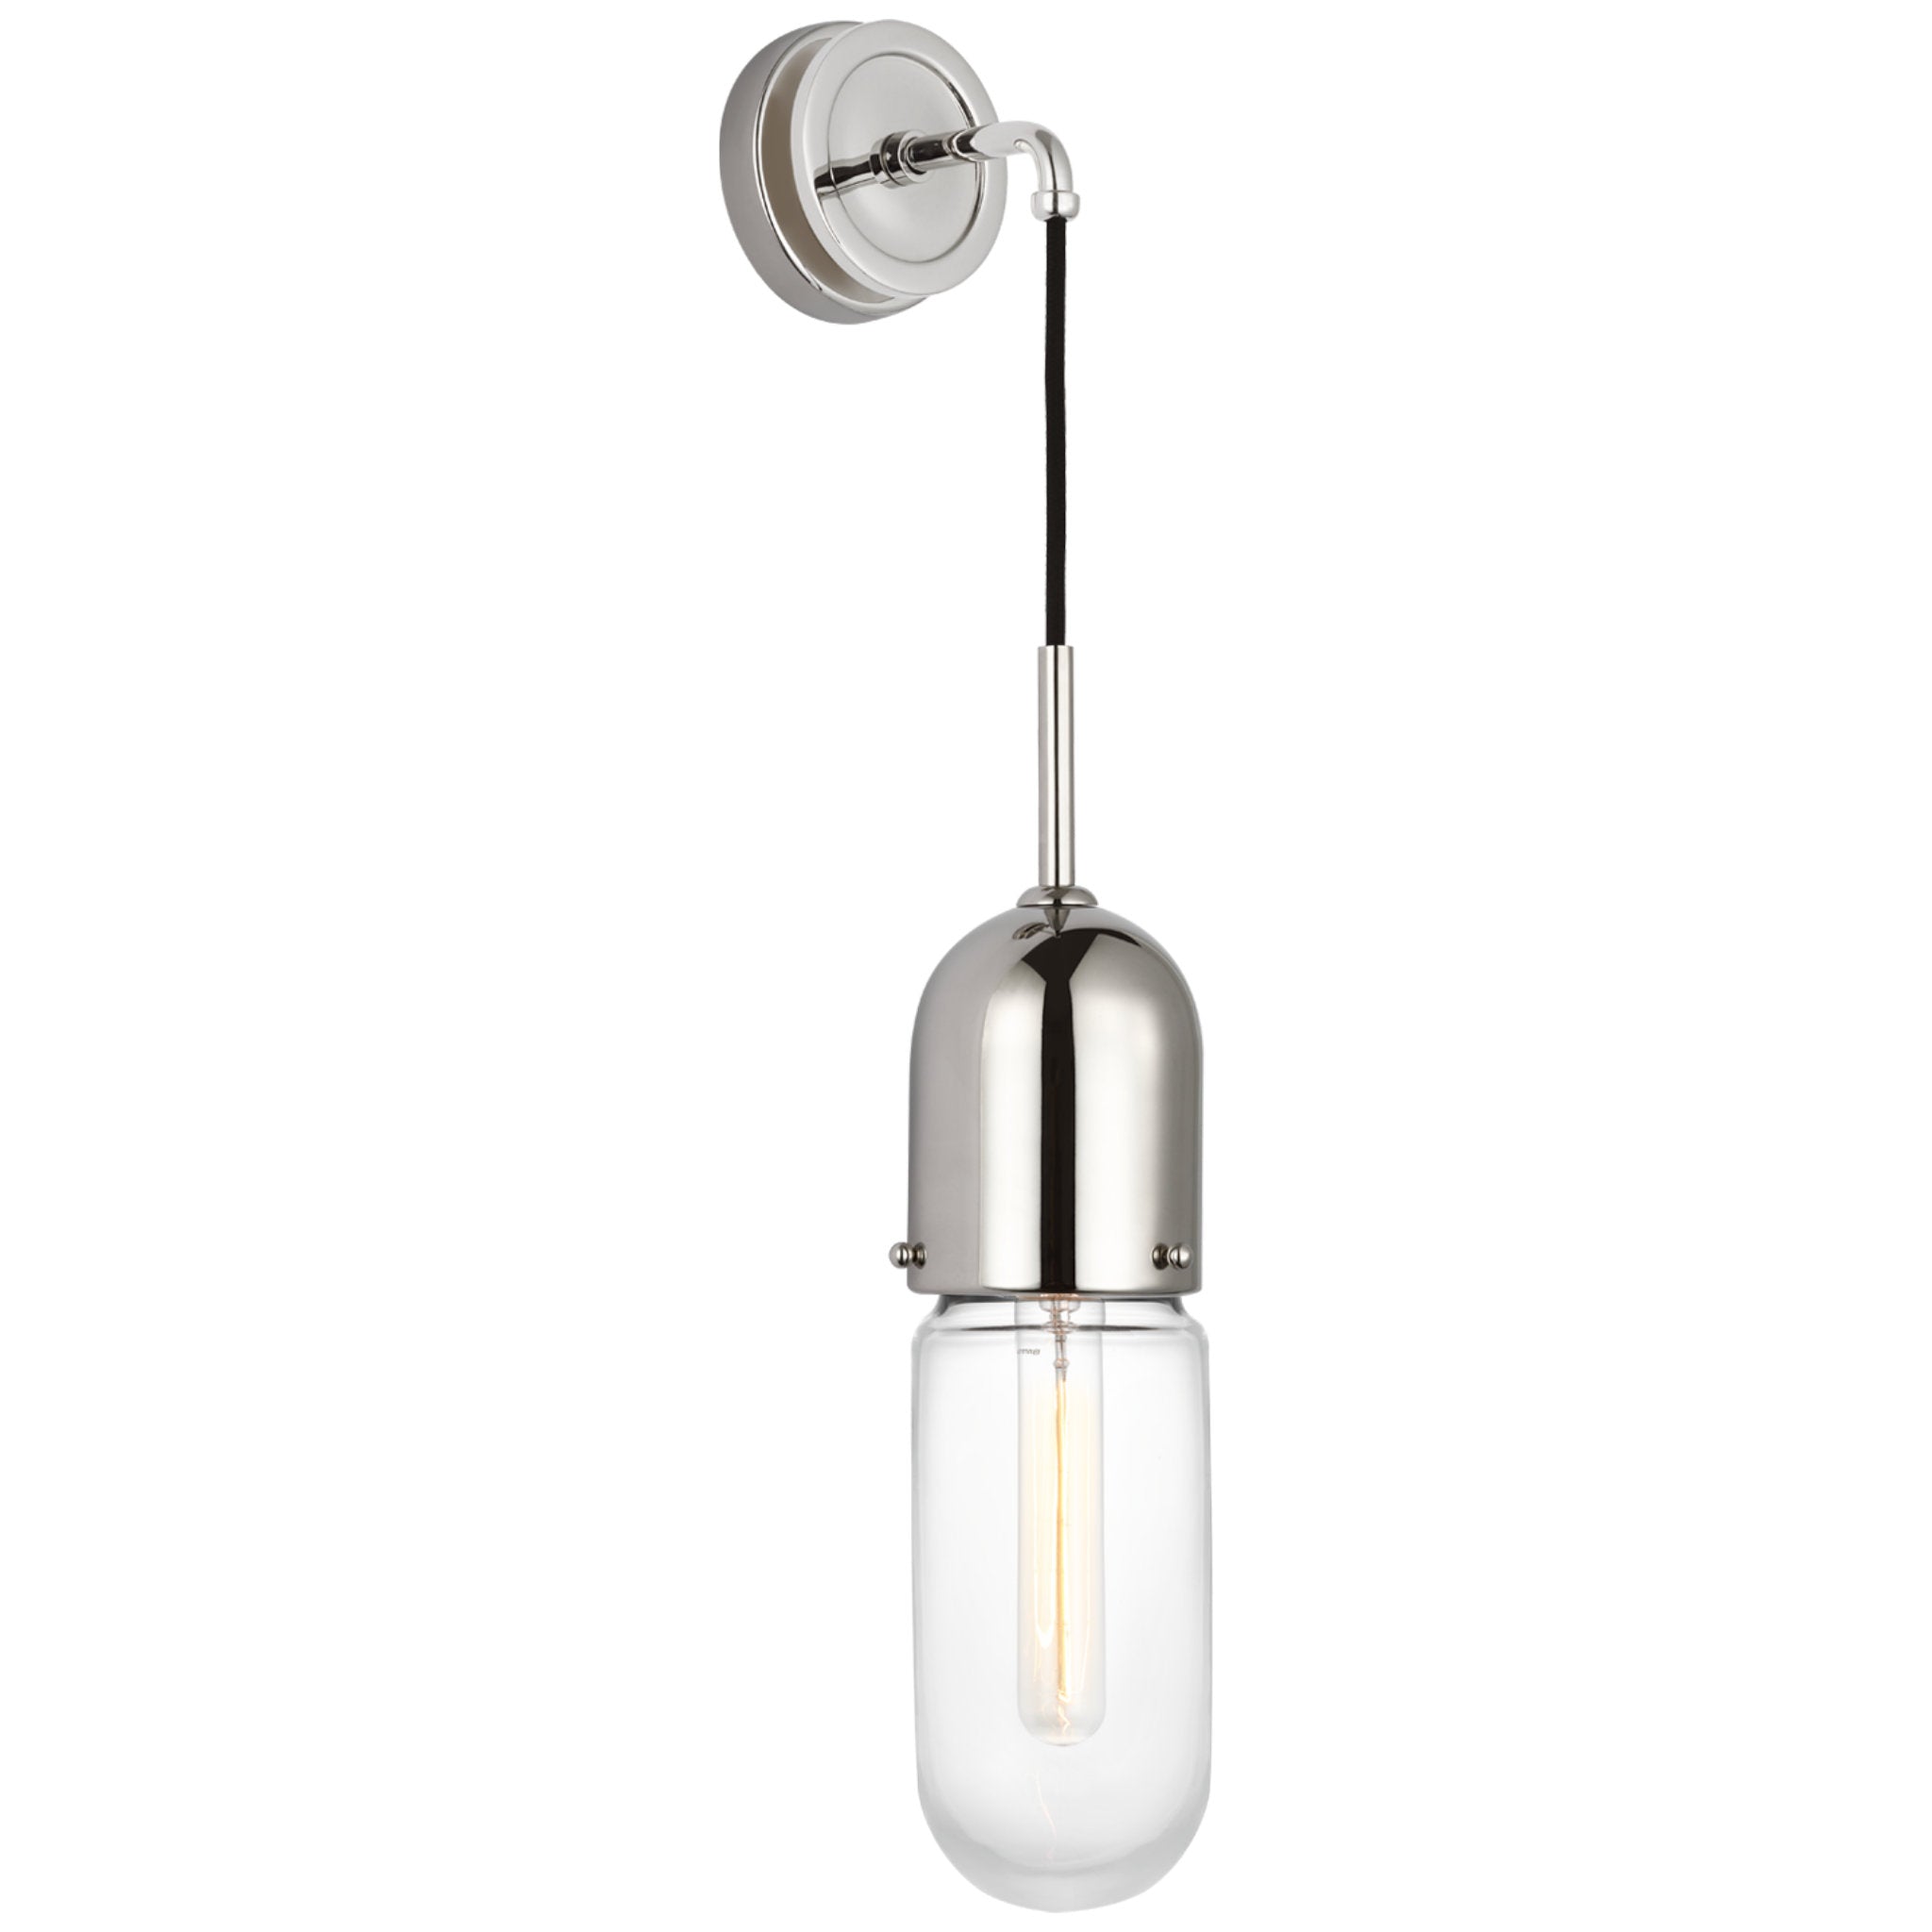 Thomas O'Brien Junio Wall Light in Polished Nickel with Clear Glass